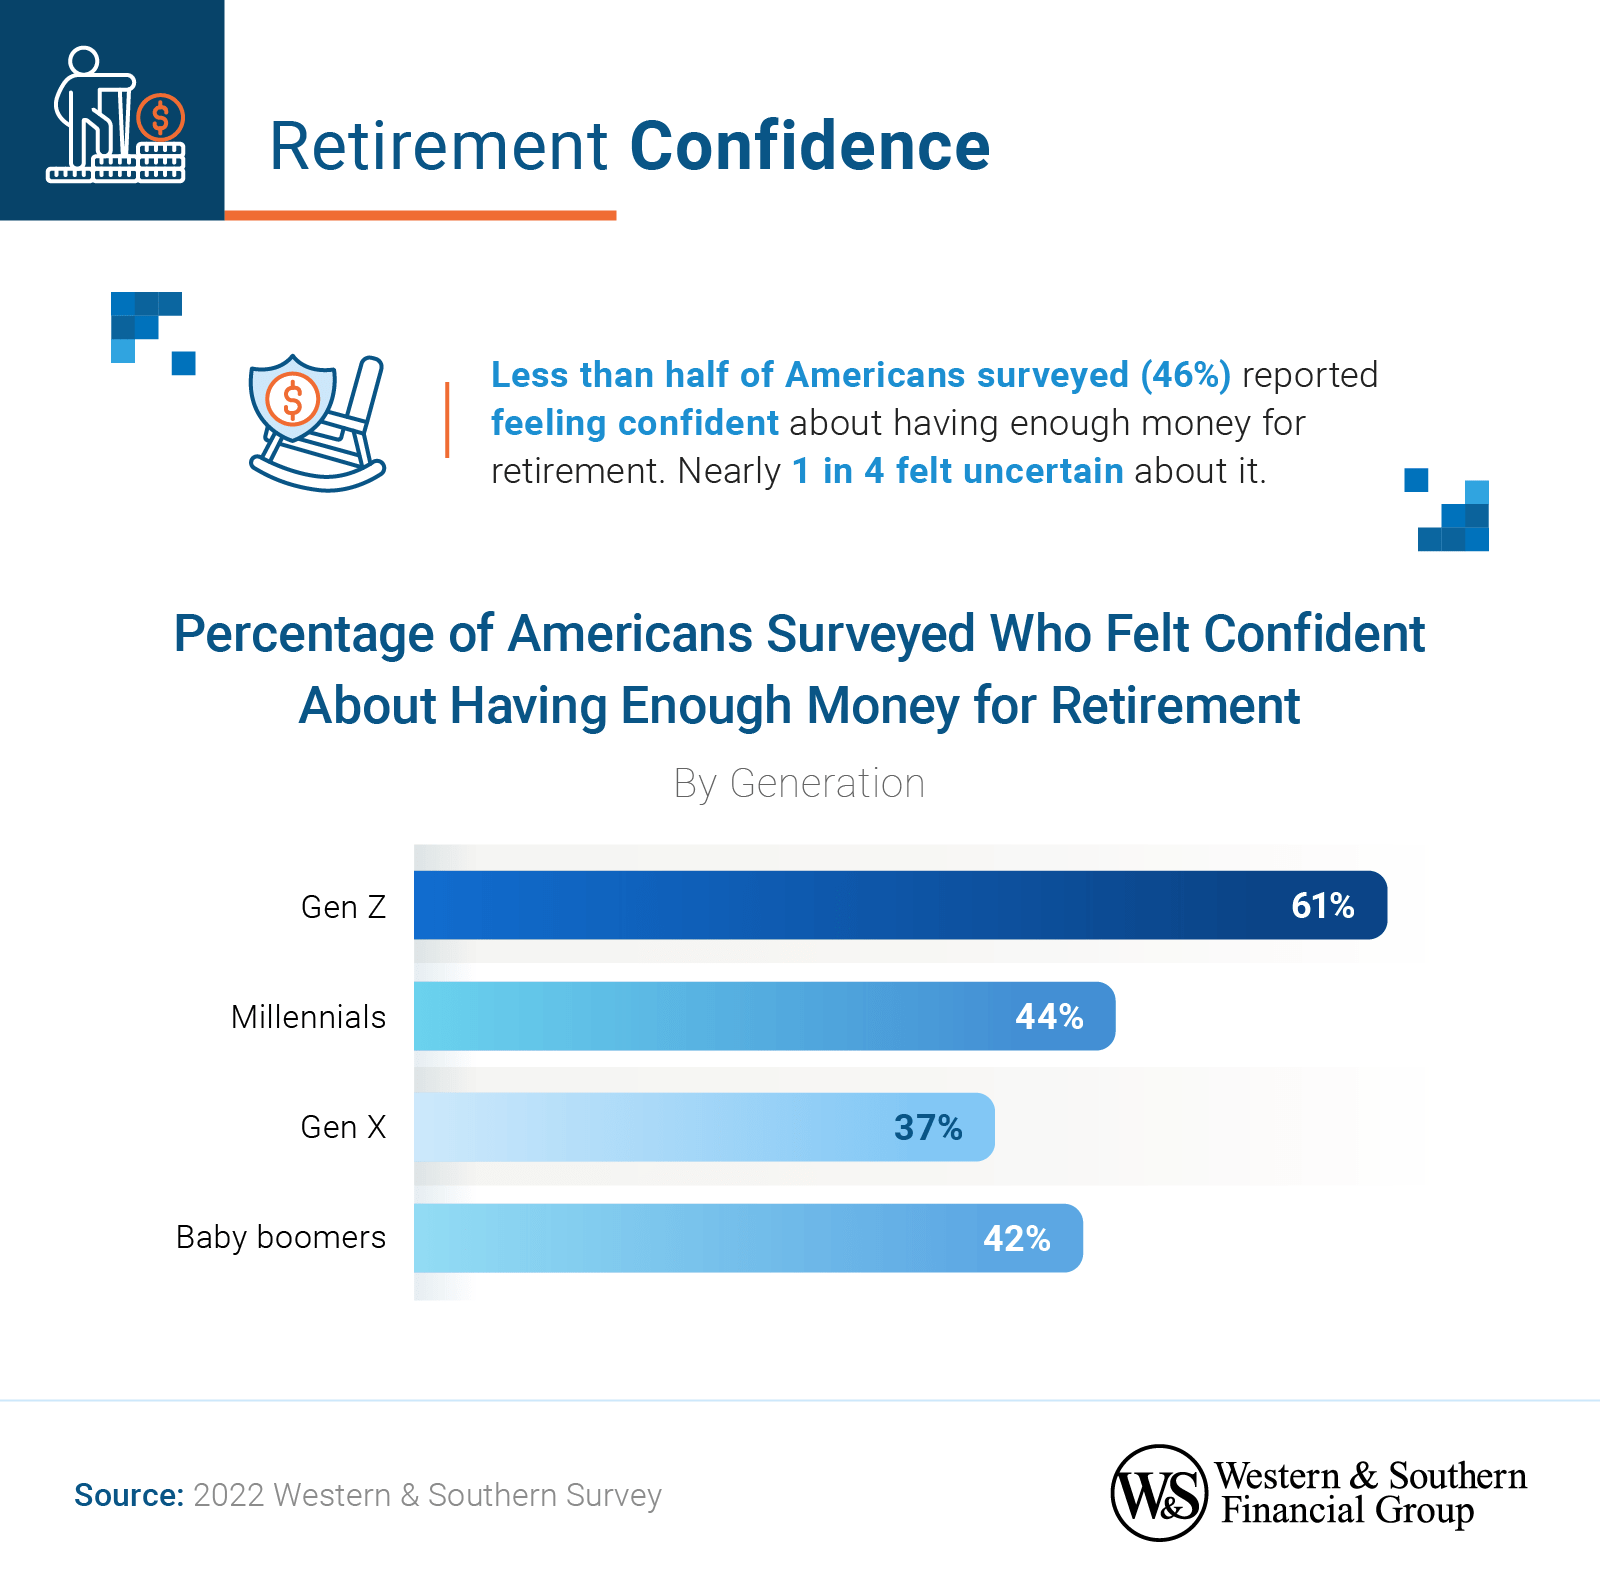 46% of Americans surveyed reported feeling confident about having enough money for retirement. 